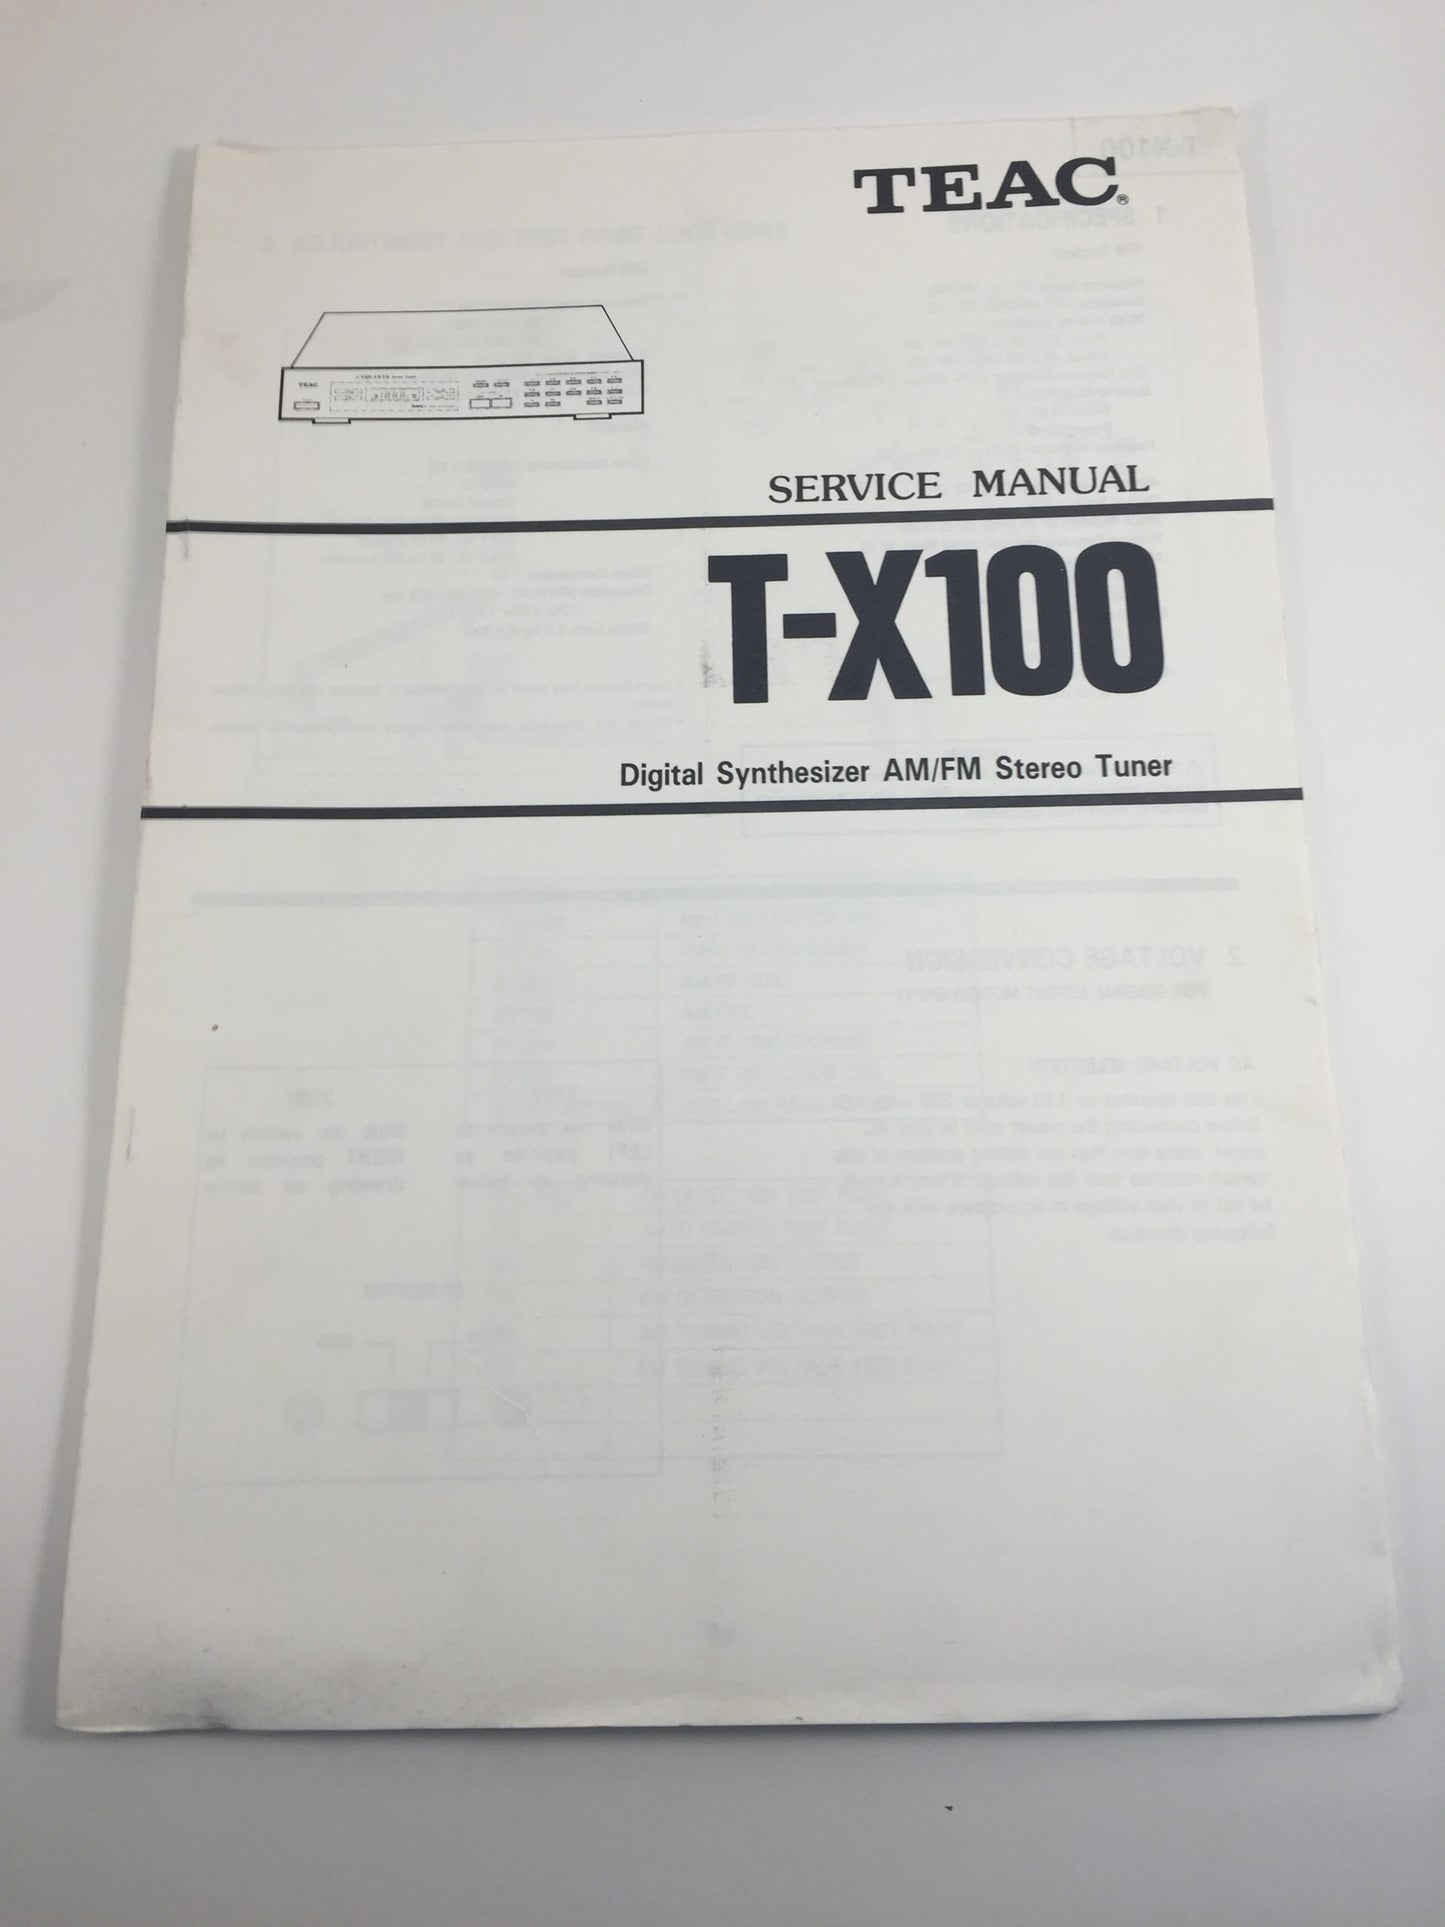 TEAC T-X100 Digital Synthesizer AM/FM Stereo Tuner Service Manual